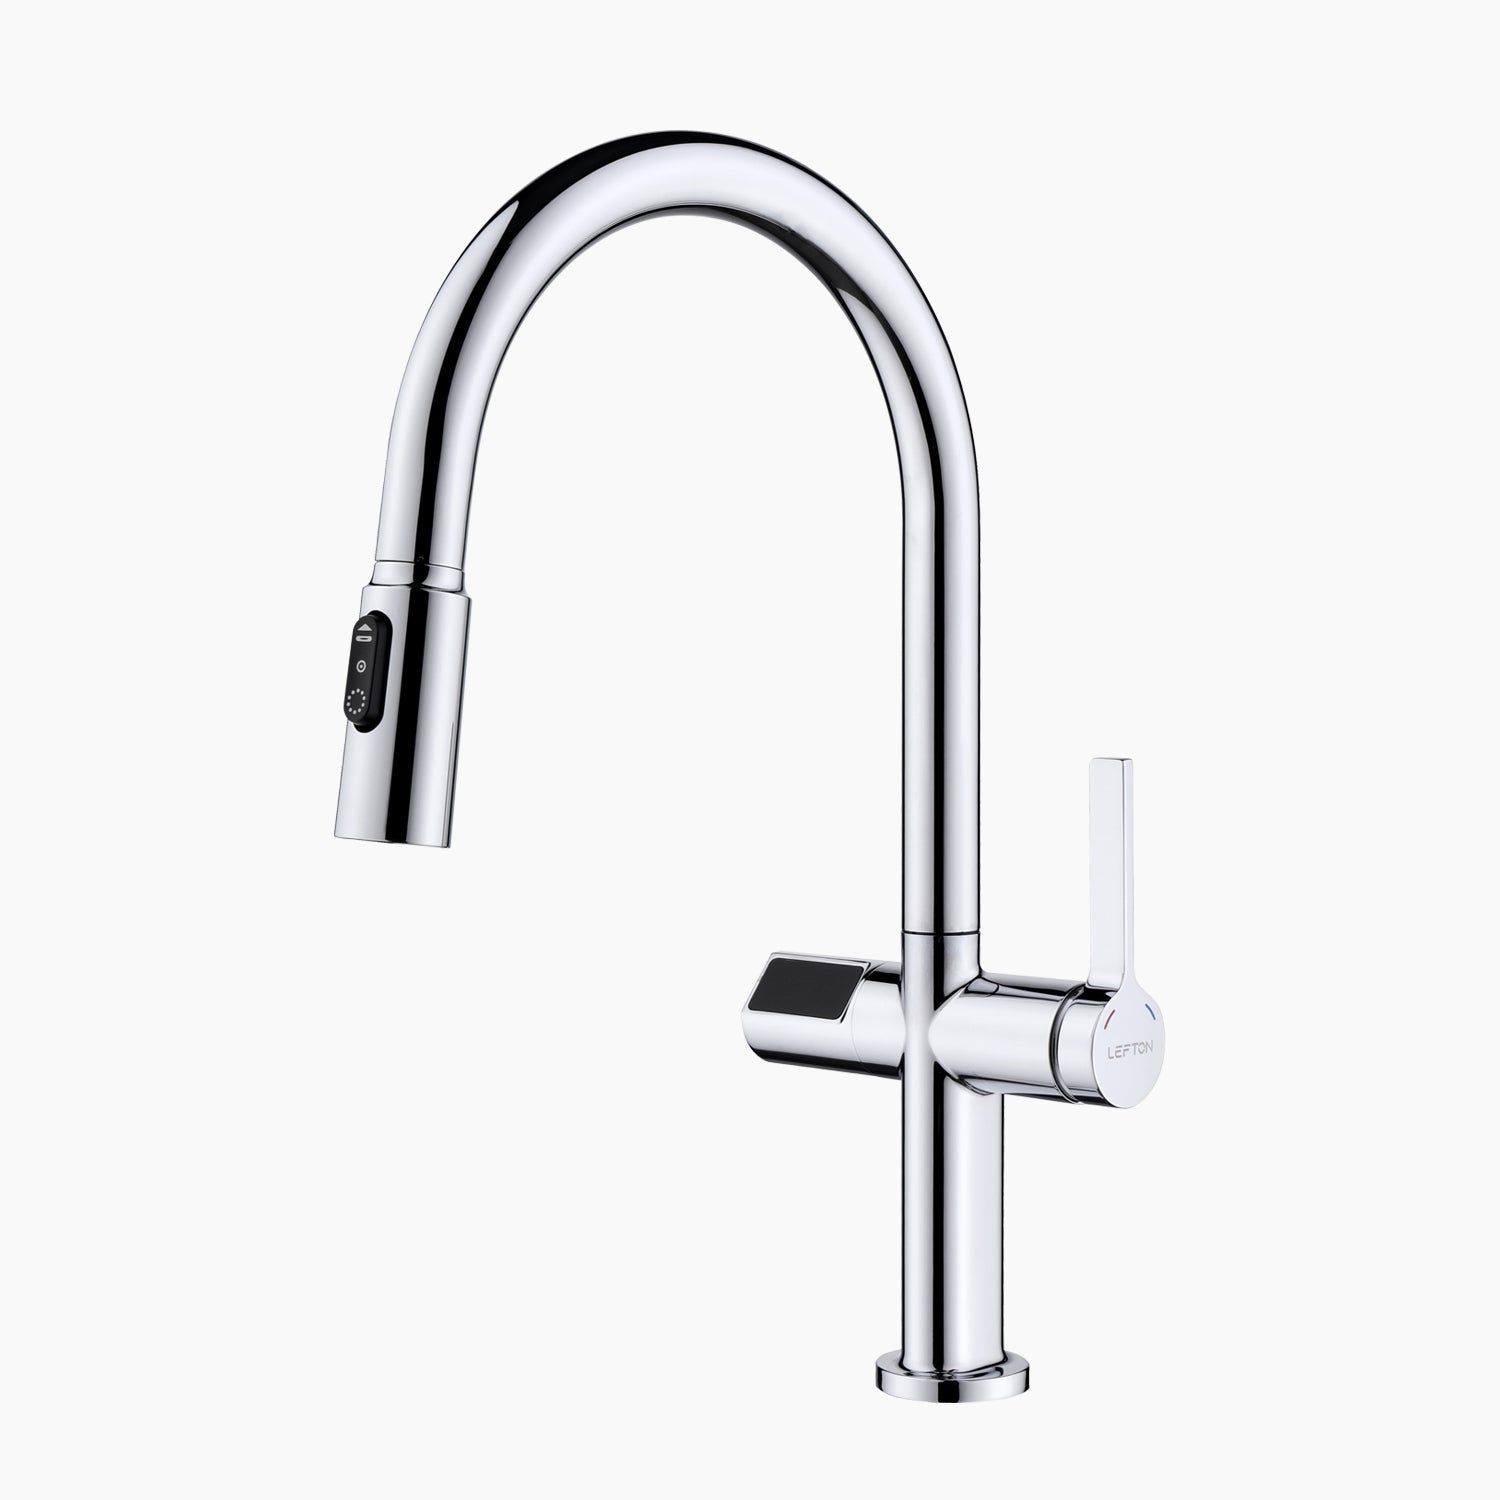 Lefton Automatic Sensor & Pull-Down Kitchen Faucet with Temperature Display-KF2206